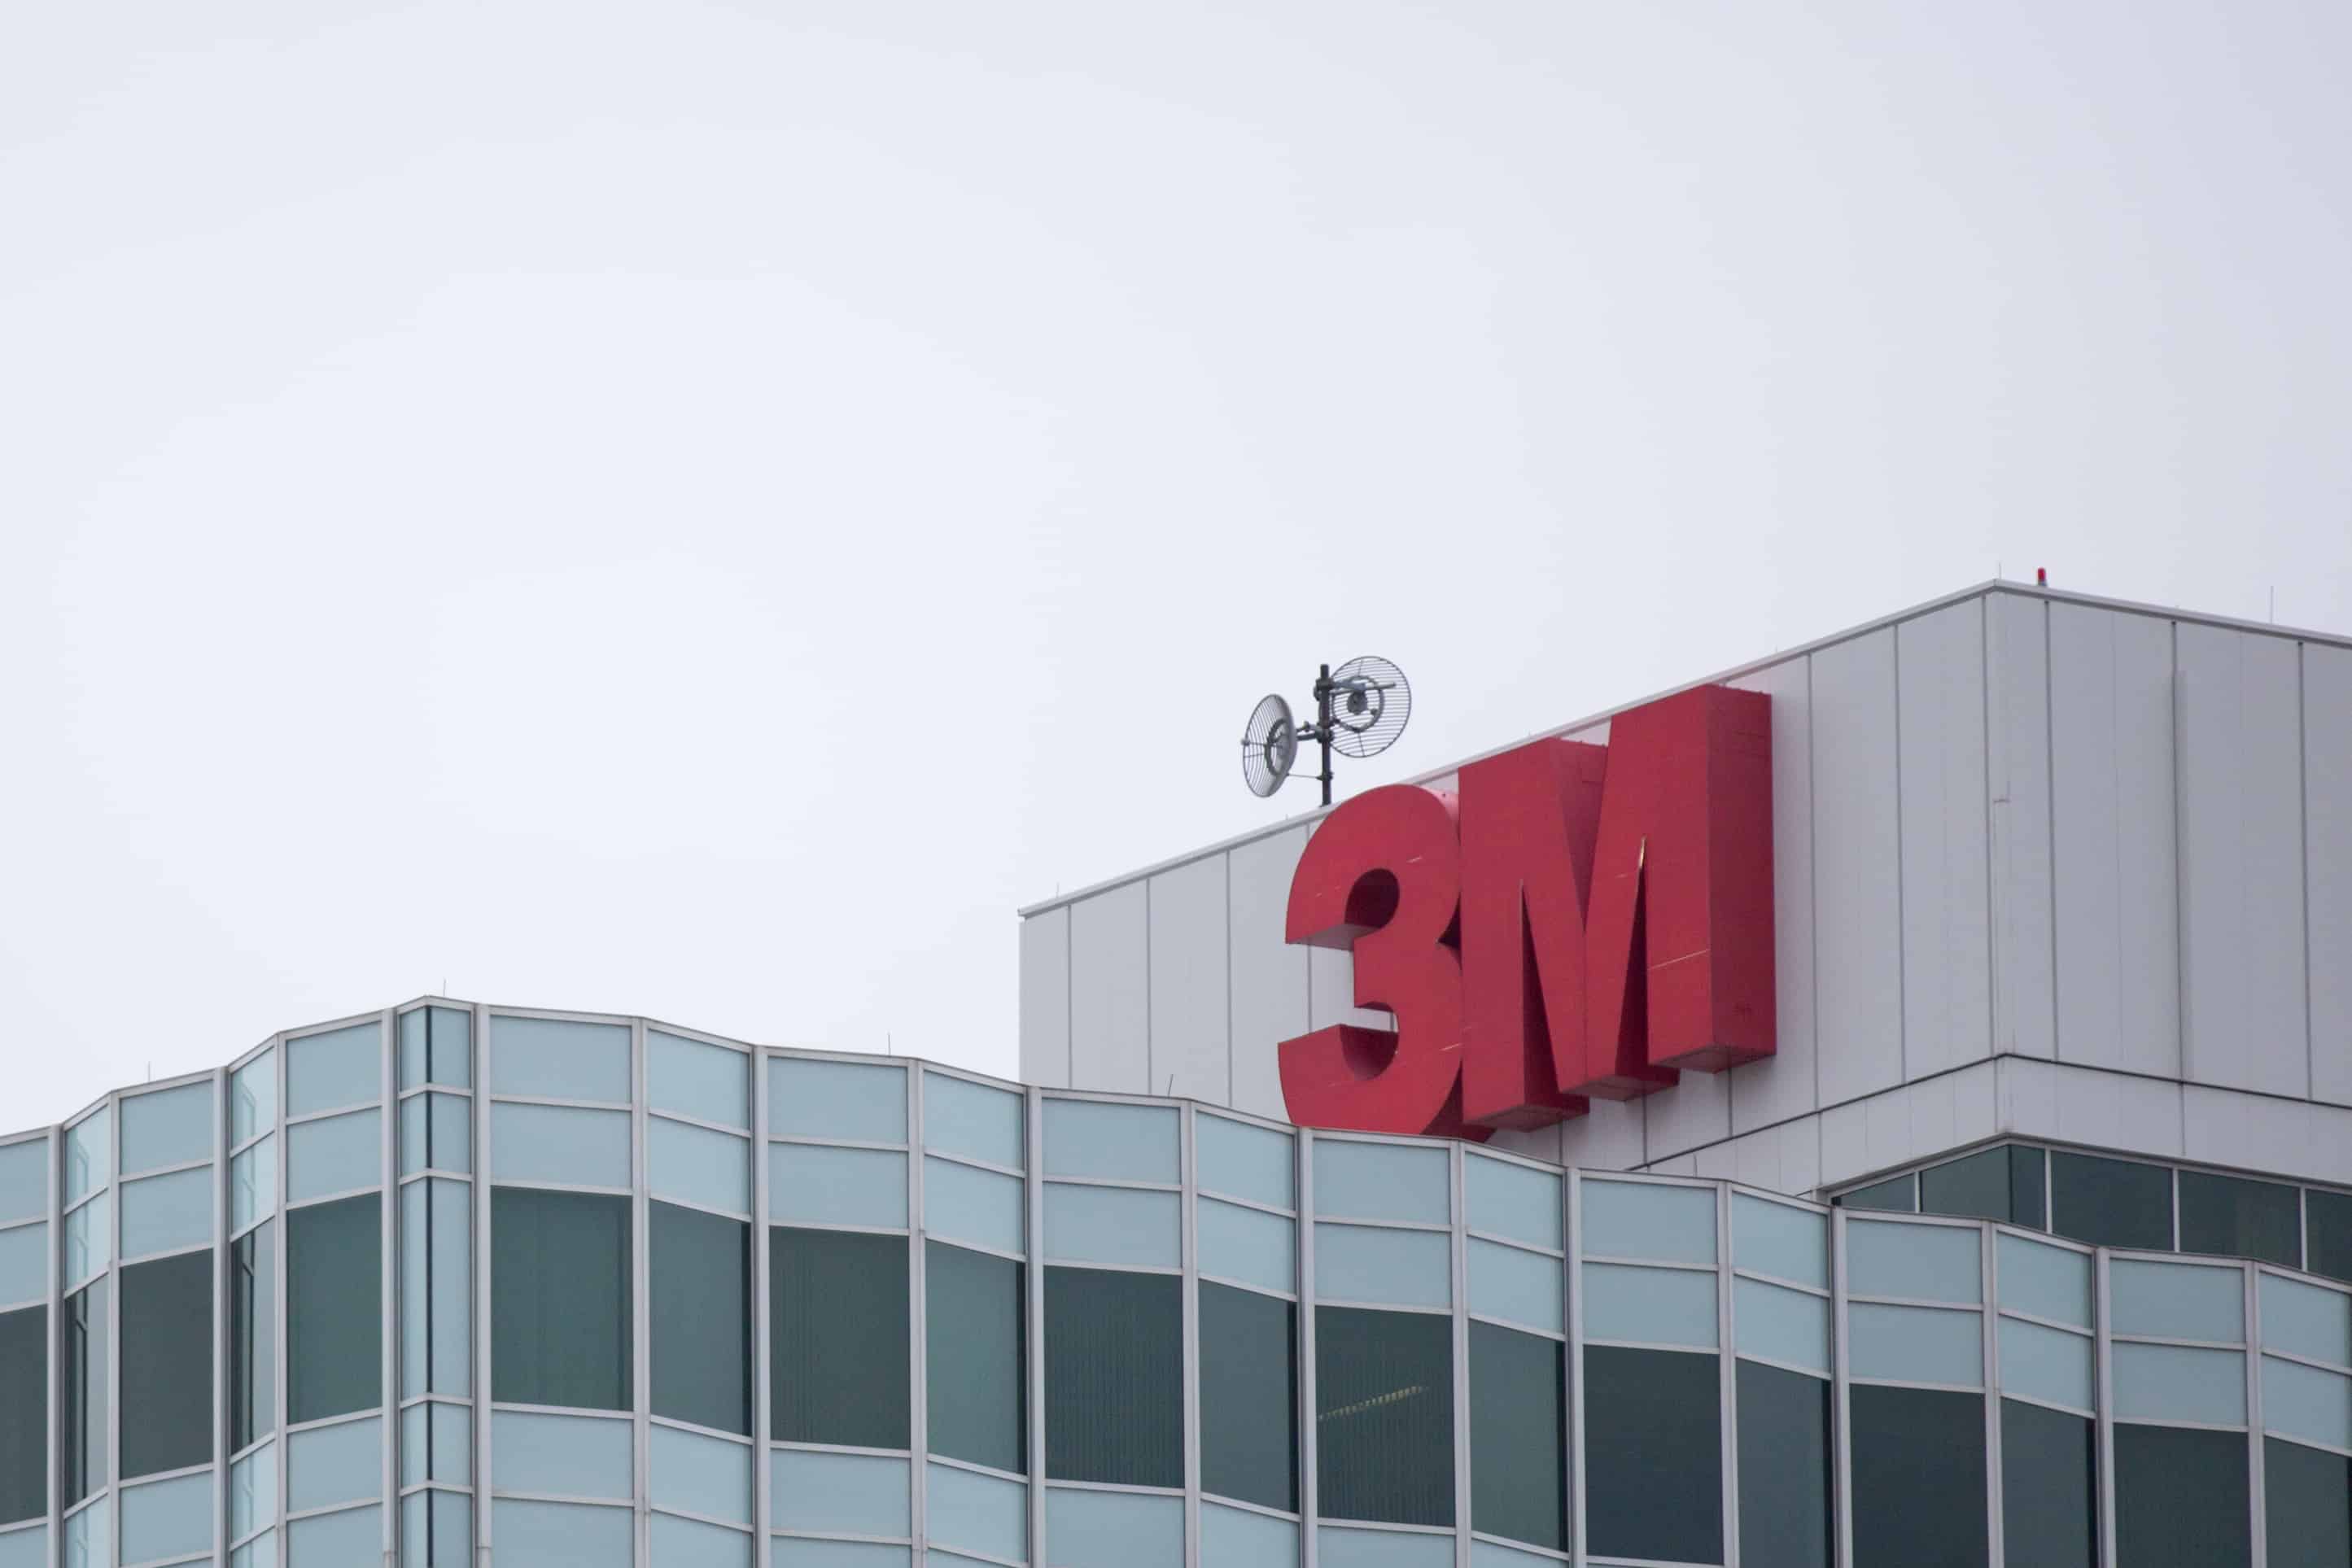 3M's purchase of MModal's tech business a highlight of H1 dealmaking